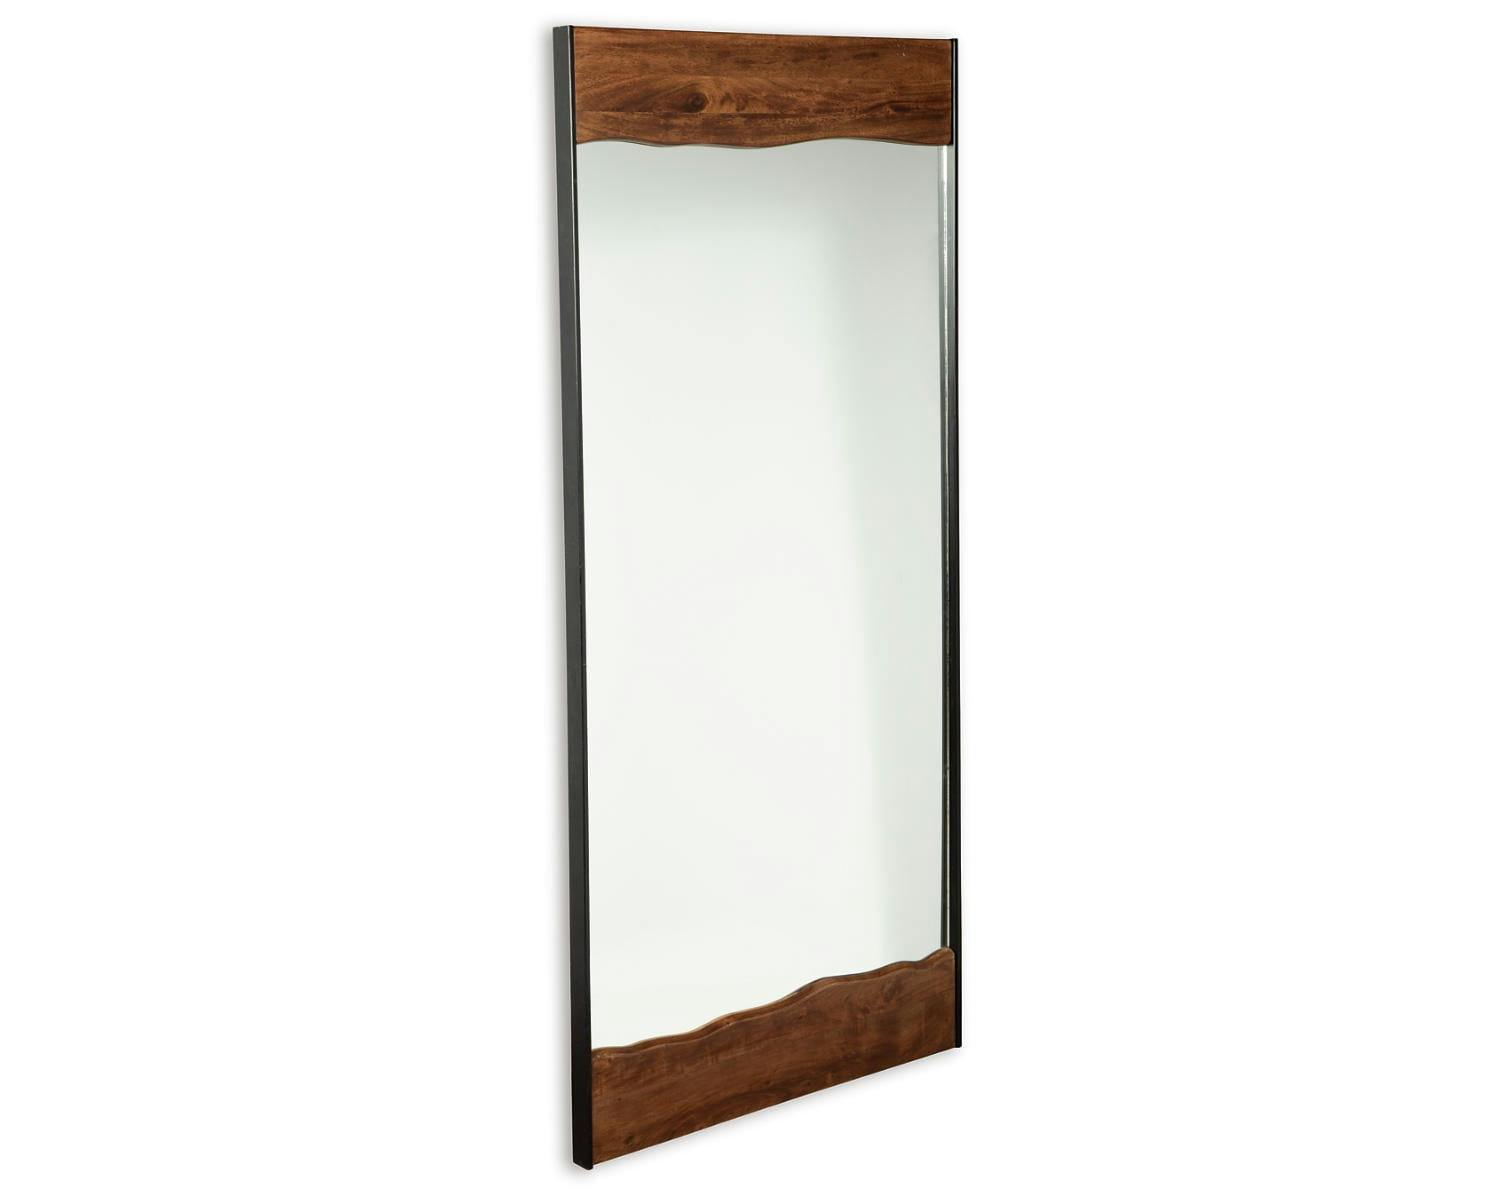 Transitional Black and Brown Wood Framed Floor Mirror 32"x69"